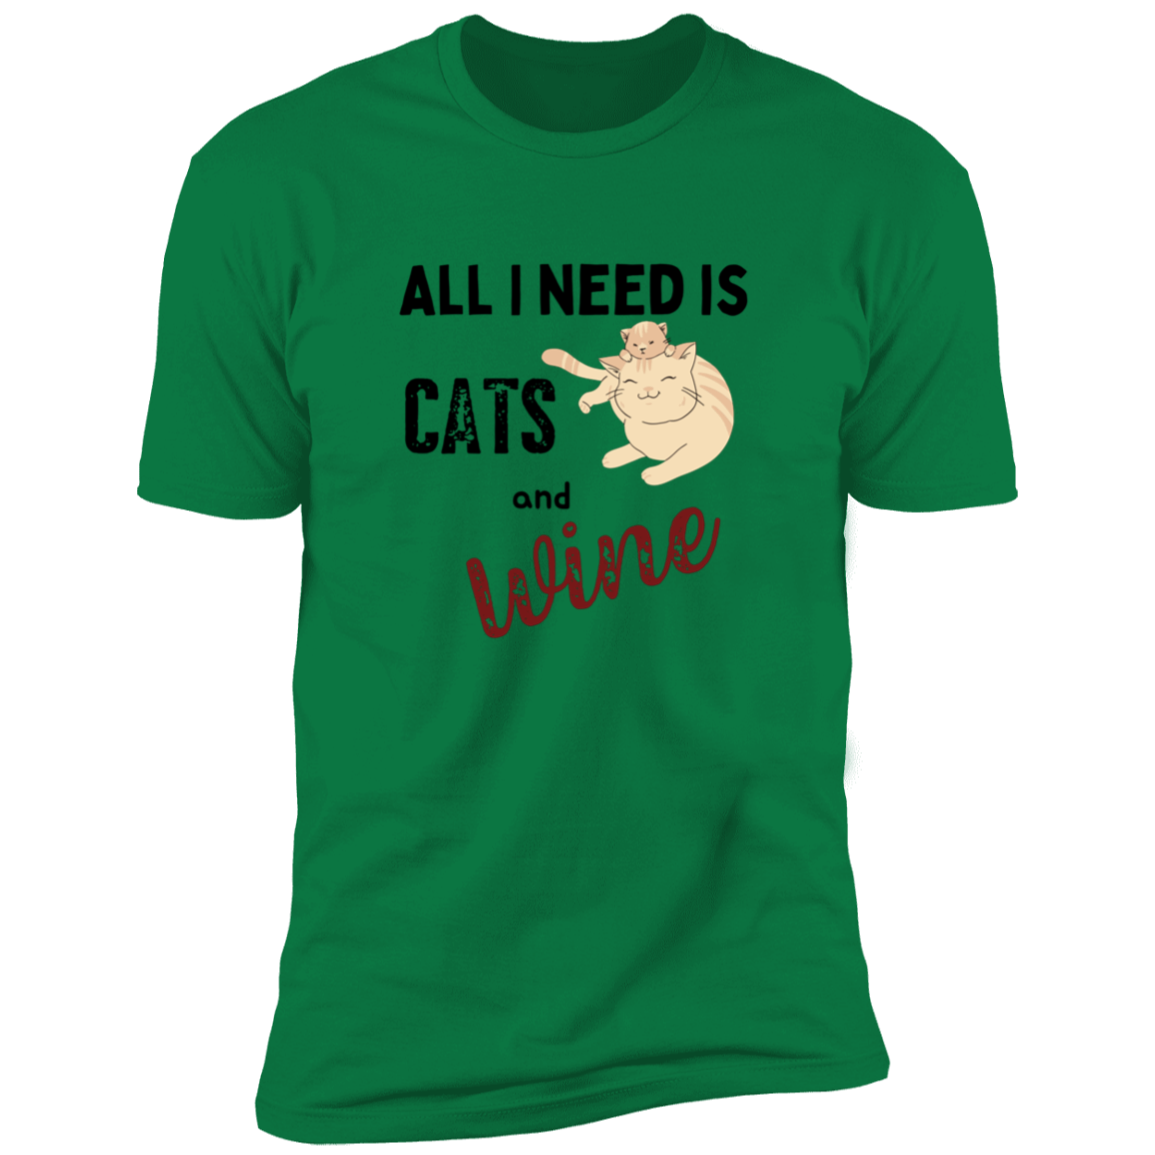 All I Need is Cats and Wine, Cat shirt for humas, in kelly green